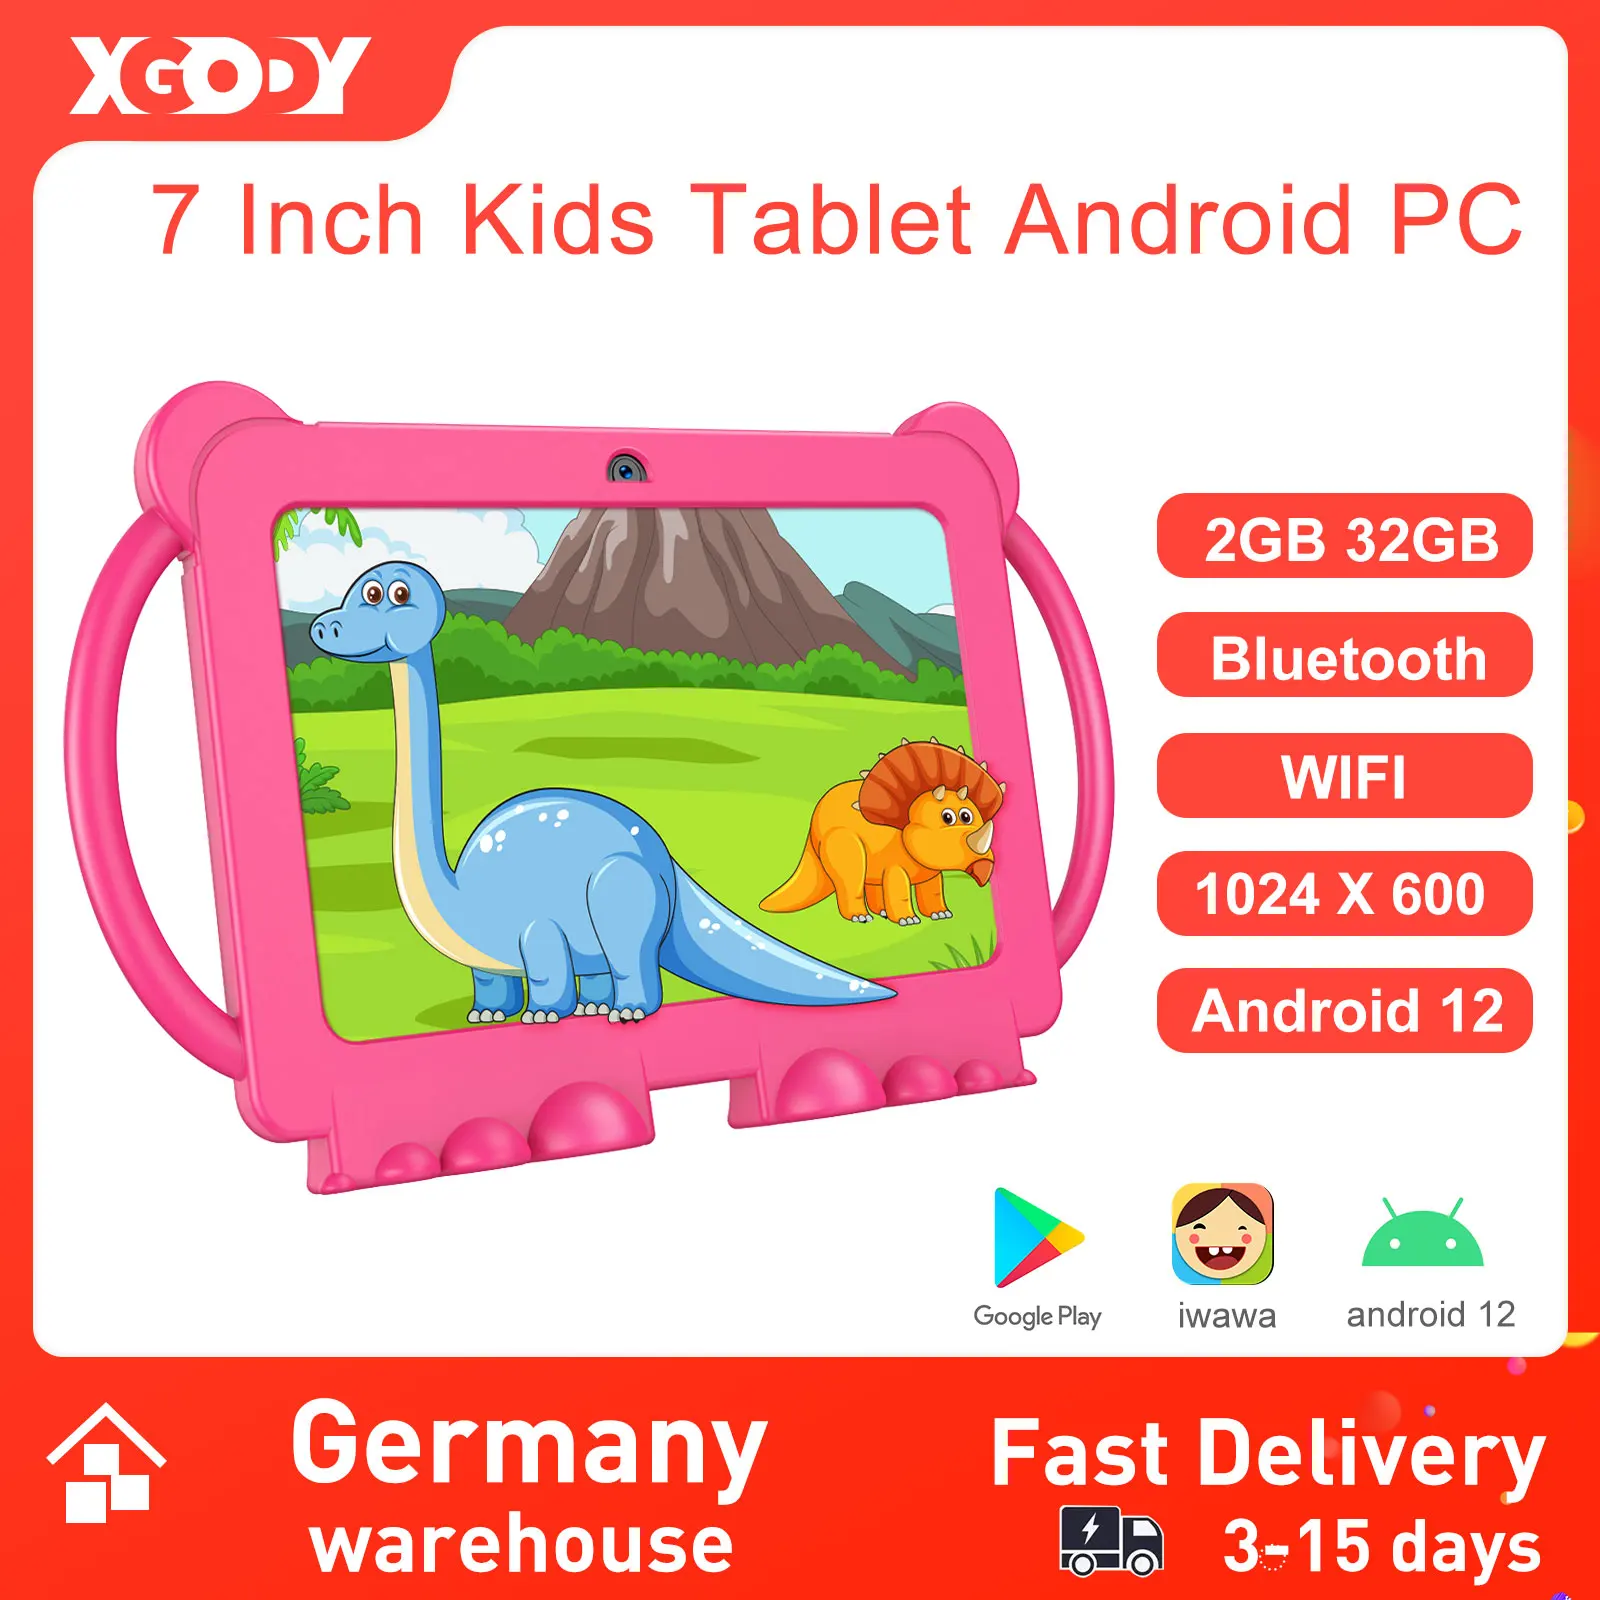 XGODY 7 Inch Android Kids Tablet PC For Study Education 32GB ROM Quad Core  WiFi OTG 1024x600 Children Tablets With Tablet Case - AliExpress